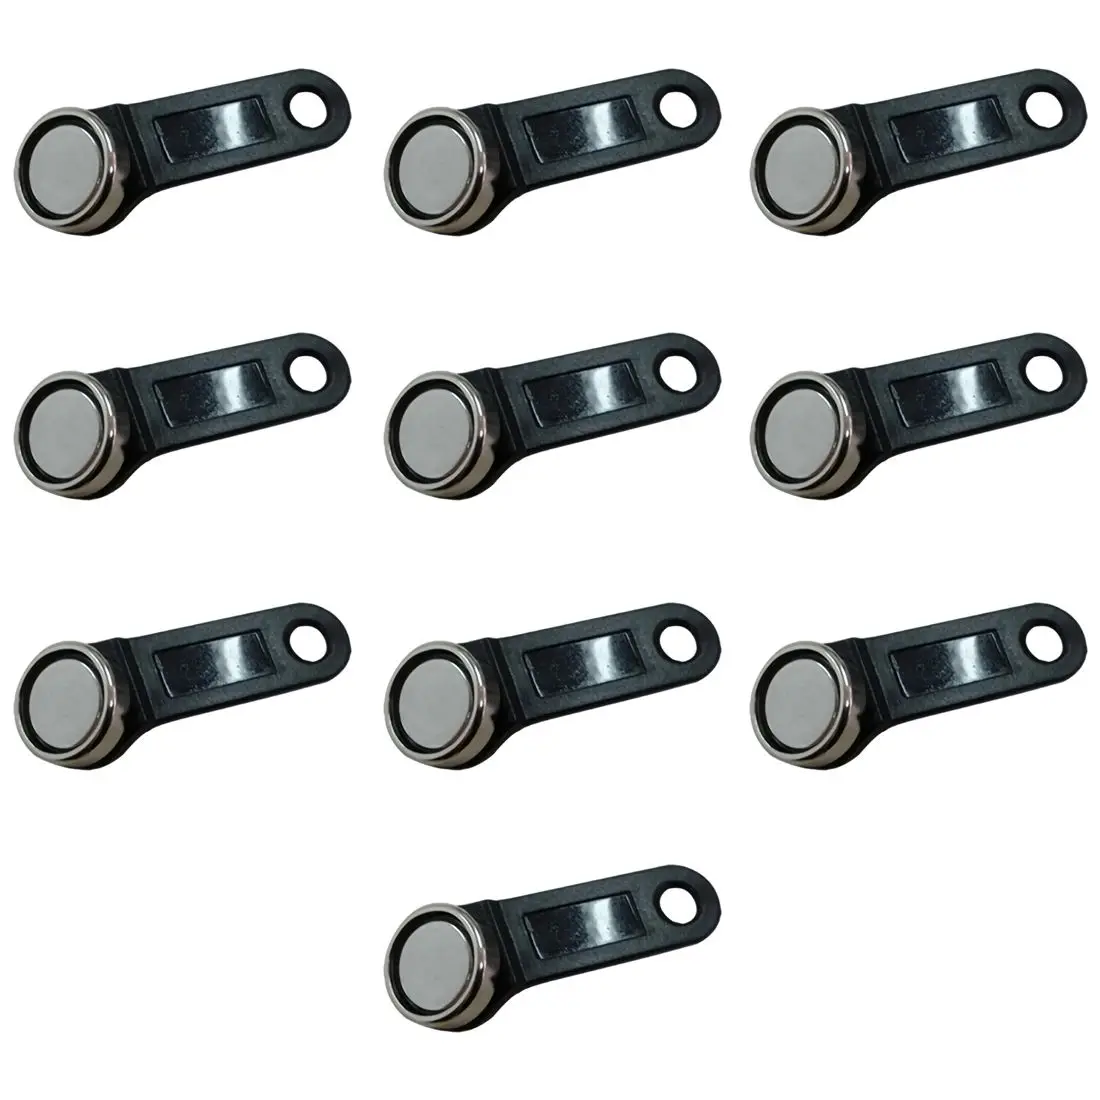 

10pcs DS1990A-F5 TM Card iButton Tag with wall-mounted Black